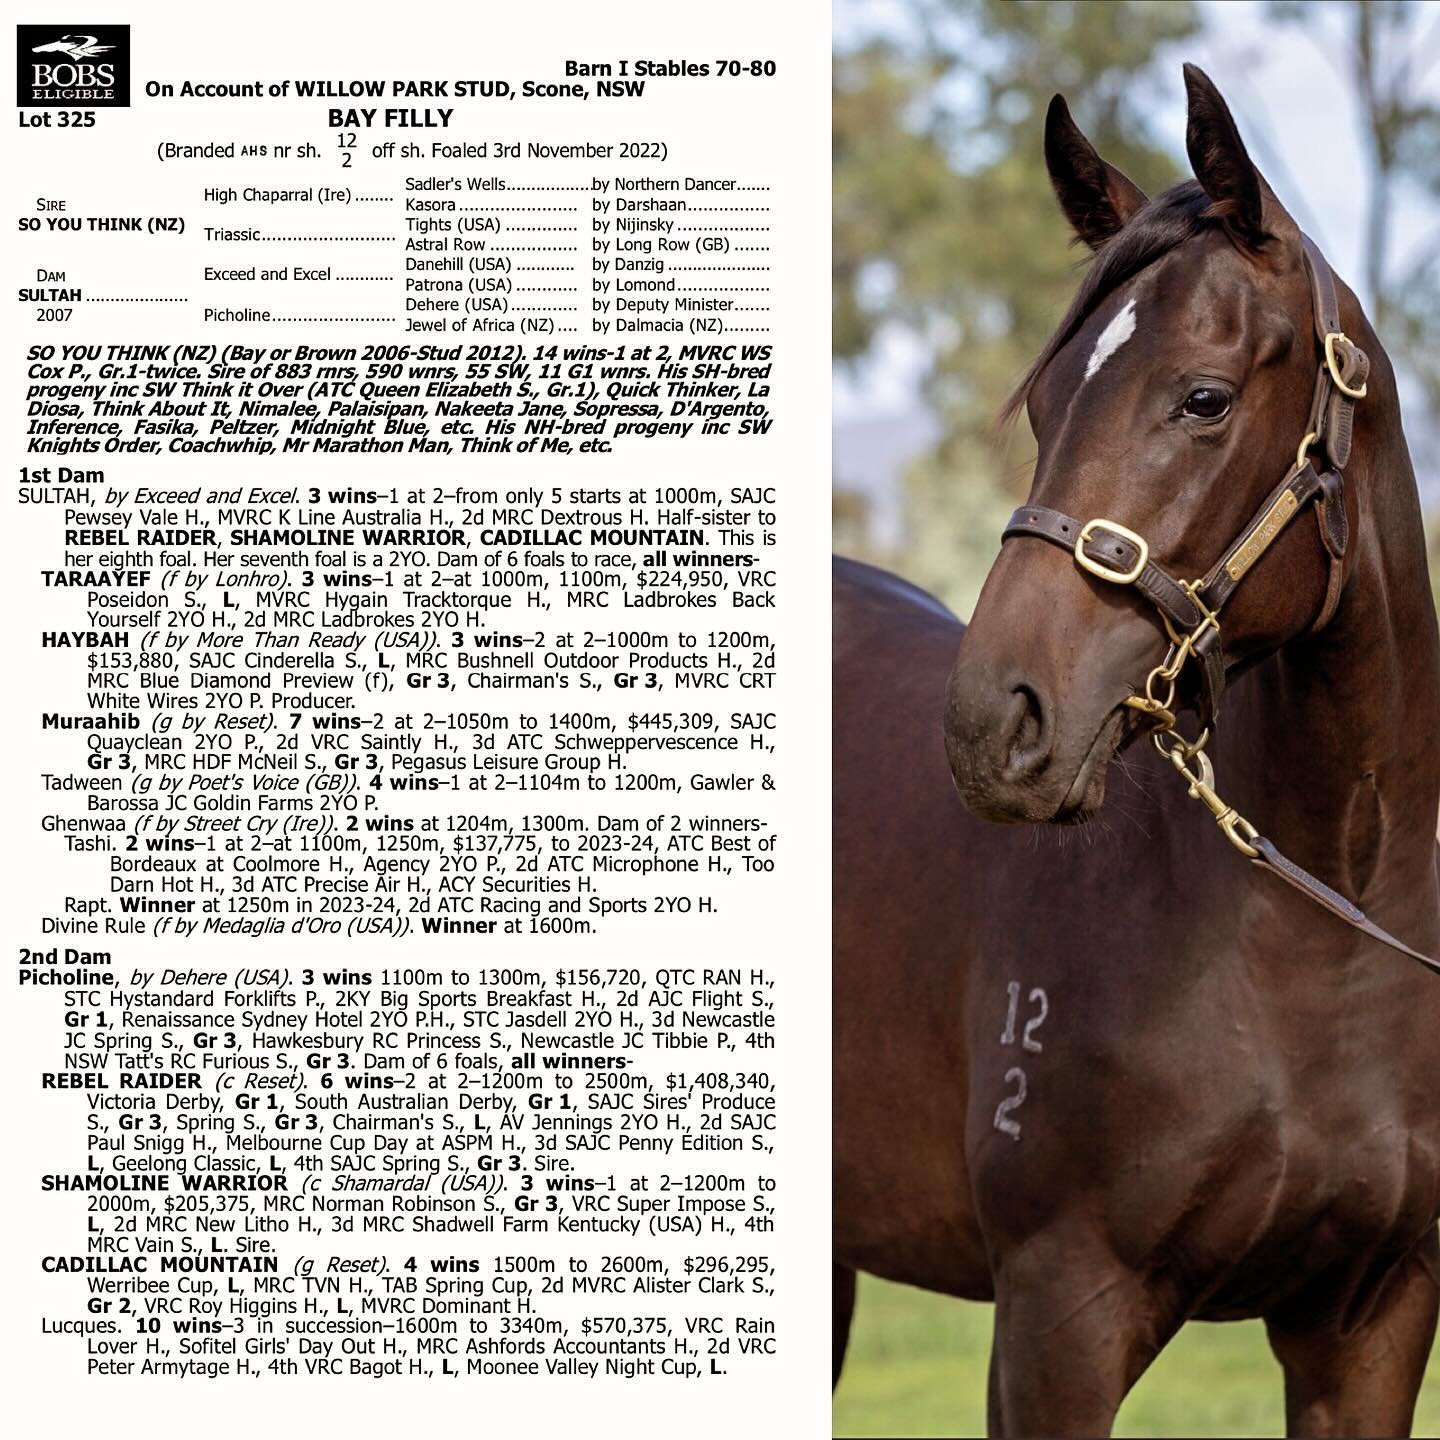 ❤️ #InglisEaster Purchase ❤️

Lot 325: So You Think x Sultah (Exceed and Excel) filly for $160,000
Vendor: @willowparkstud 

While the primary focus is always on finding an equine athlete capable of winning at the highest level, when they look and mo